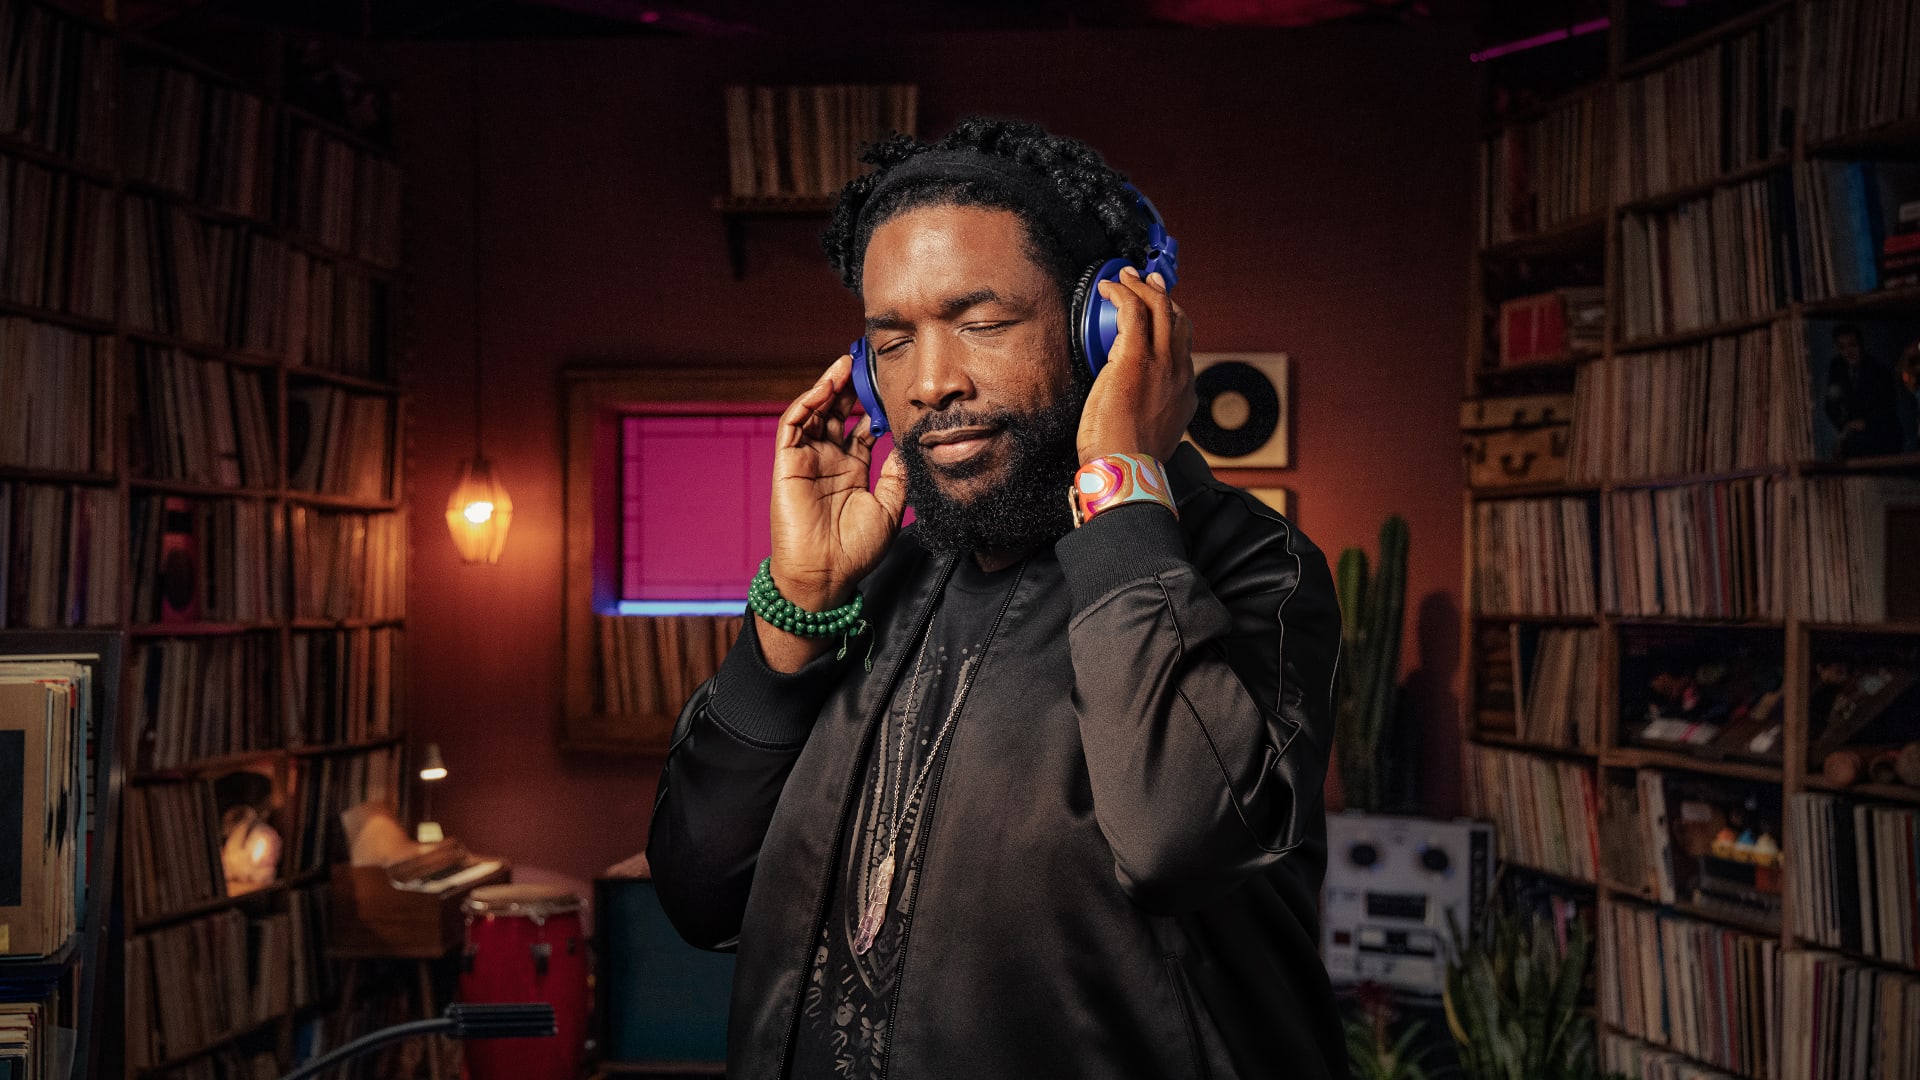 Questlove announces MasterClass in DJing and Music Curation